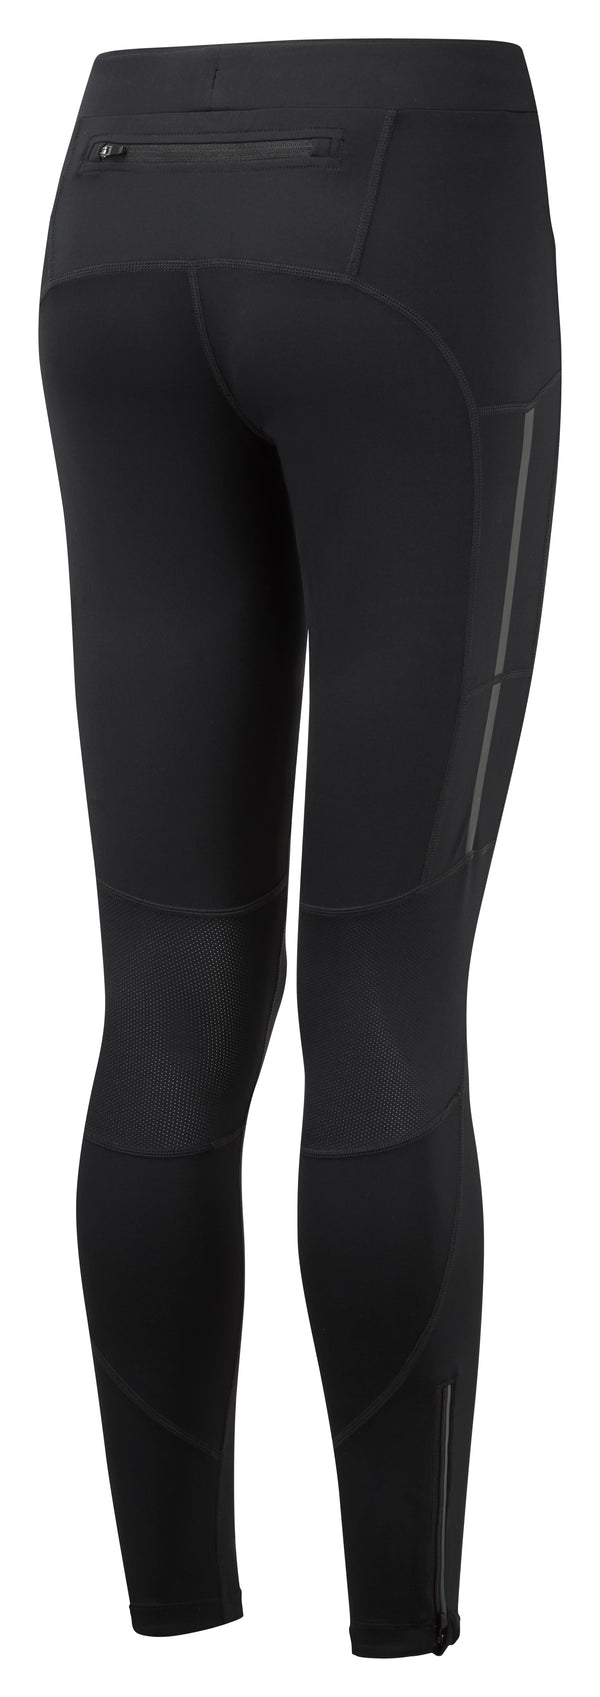 Ronhill | Wmn's Tech Revive Stretch Tight | All Black | M